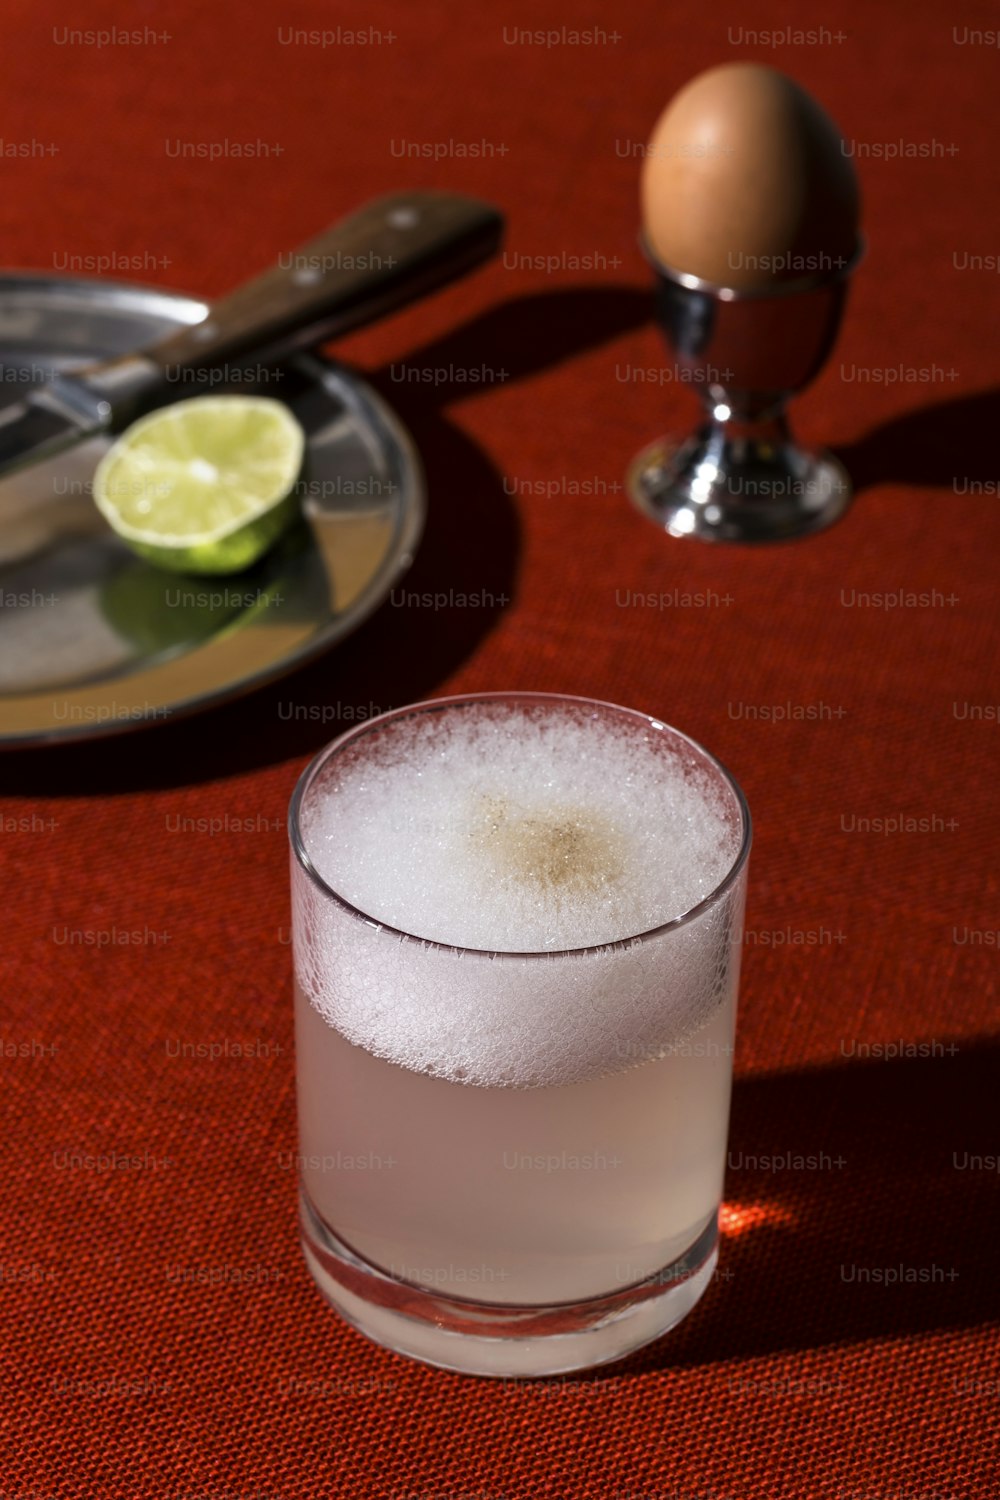 Mix the pisco, lime juice, simple syrup, and egg white in a cocktail shaker. Add ice to fill, and shake vigorously. Alternatively, you can use a blender if you don't have a shaker. Strain into an old-fashioned glass, and sprinkle the Angostura bitters on top of the foam.